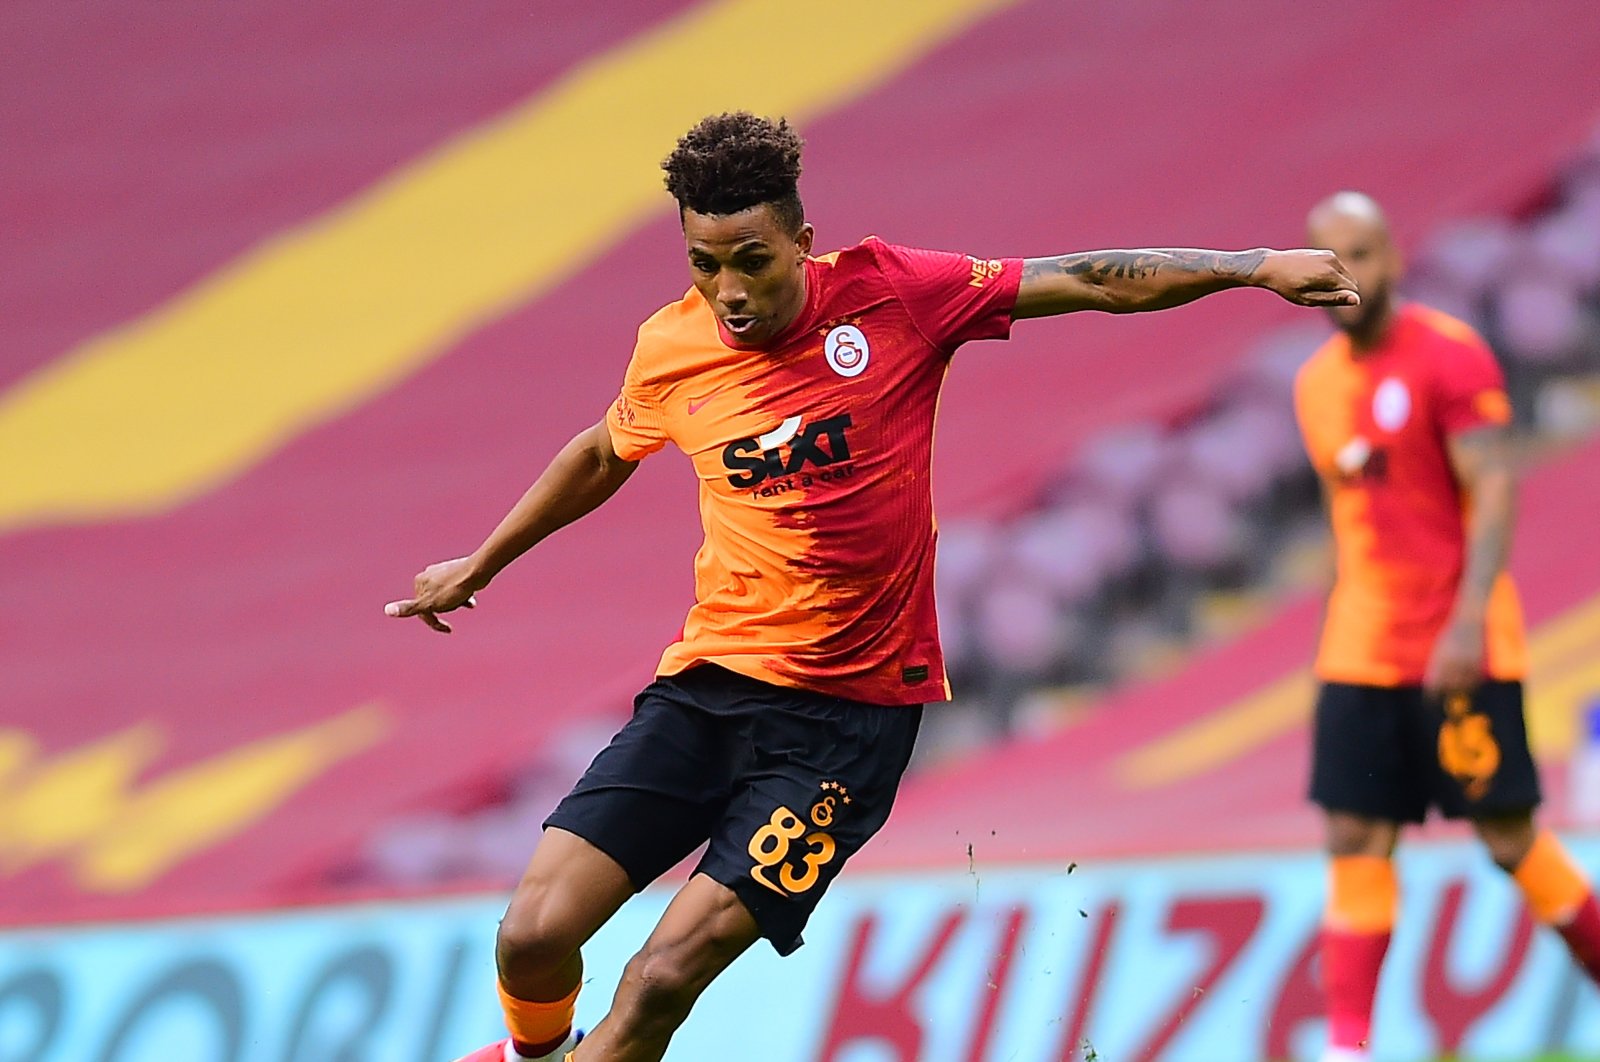 Galatasaray&#039;s Gedson Fernandes is seen during a Turkish Super Lig match against Trabzonspor at Ali Sami Yen Sports Complex in Istanbul, Turkey, April 21, 2021. (Photo by Turgut Doğan / Archive)